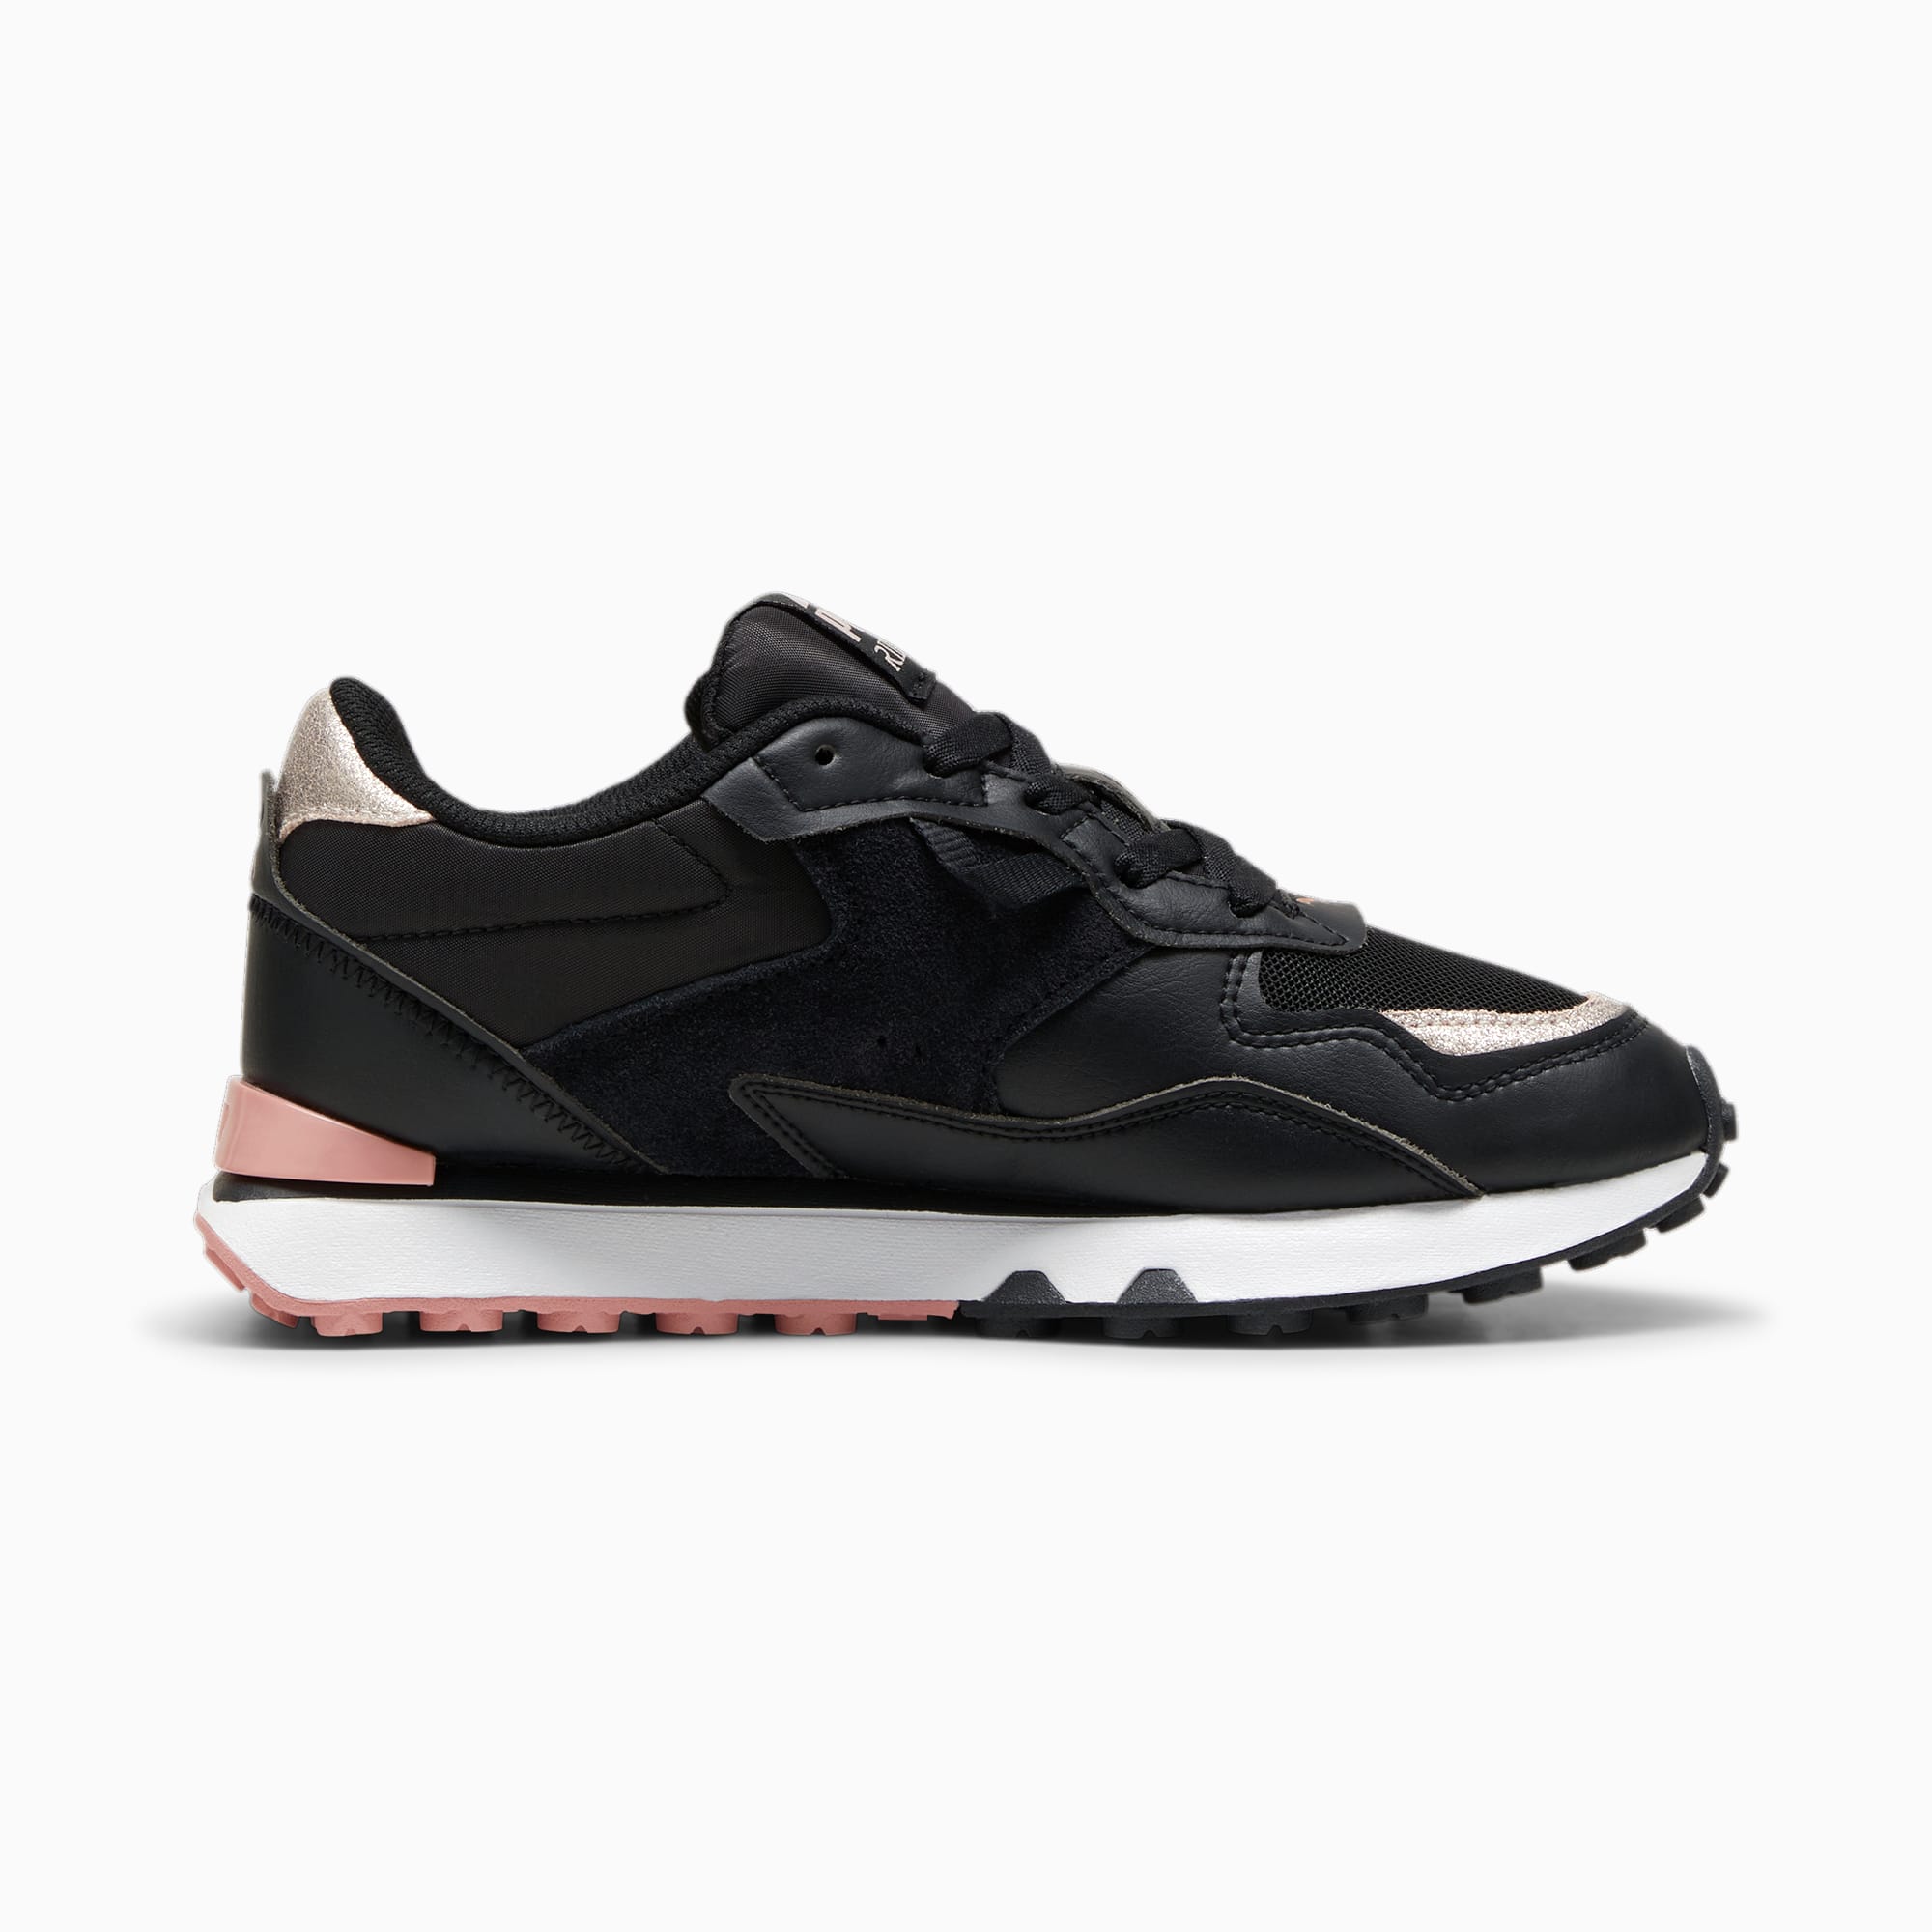 PUMA Rider Fvw Glam Women's Sneakers, Black/Rose Gold